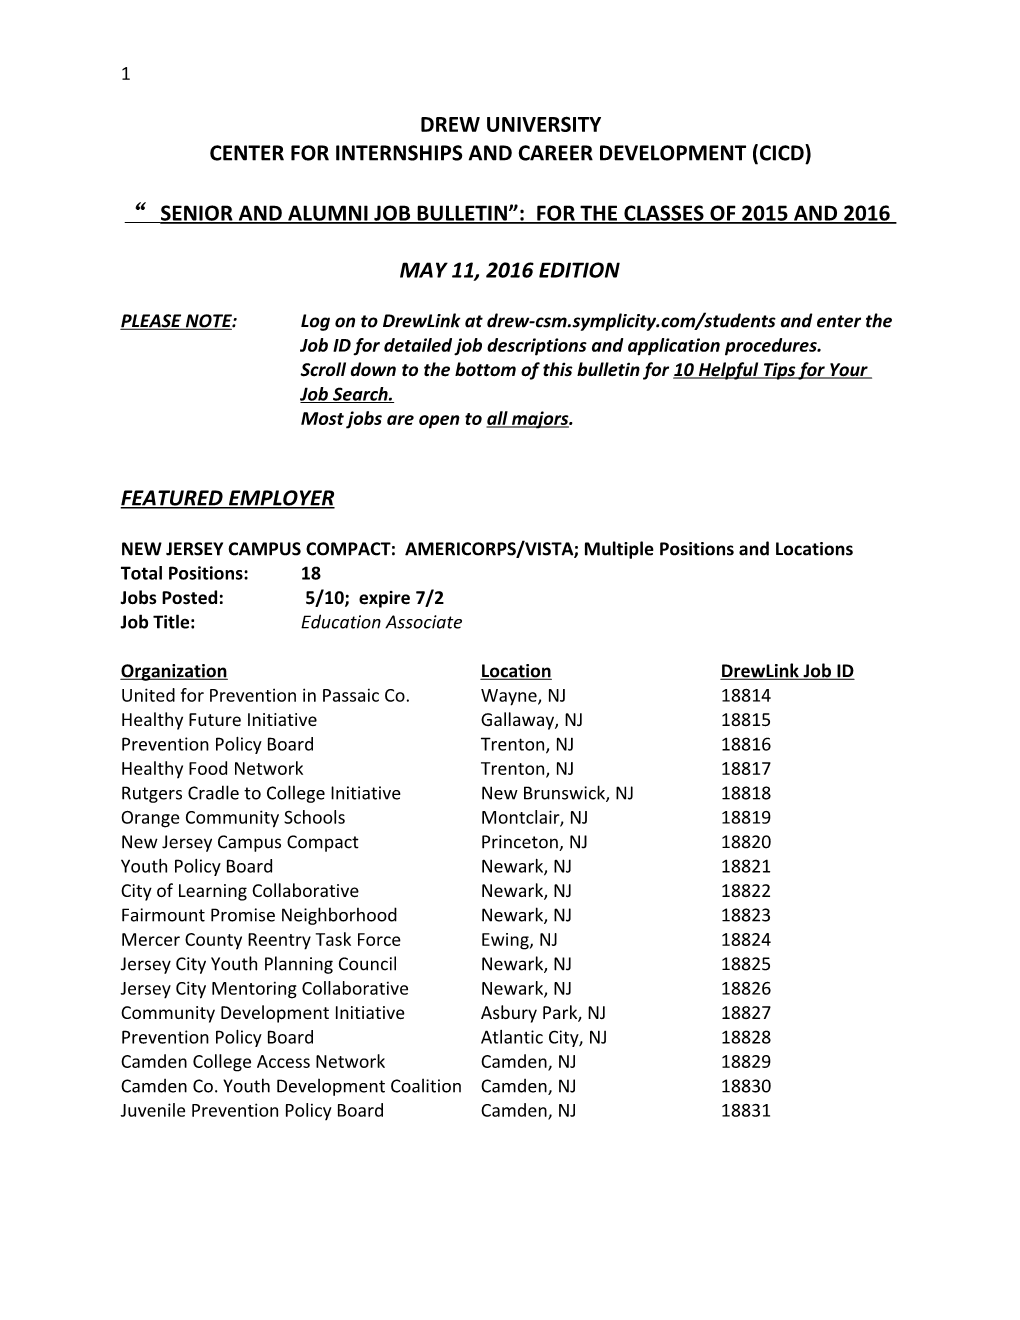 Senior and Alumni Job Bulletin : for the Classes of 2015 and 2016